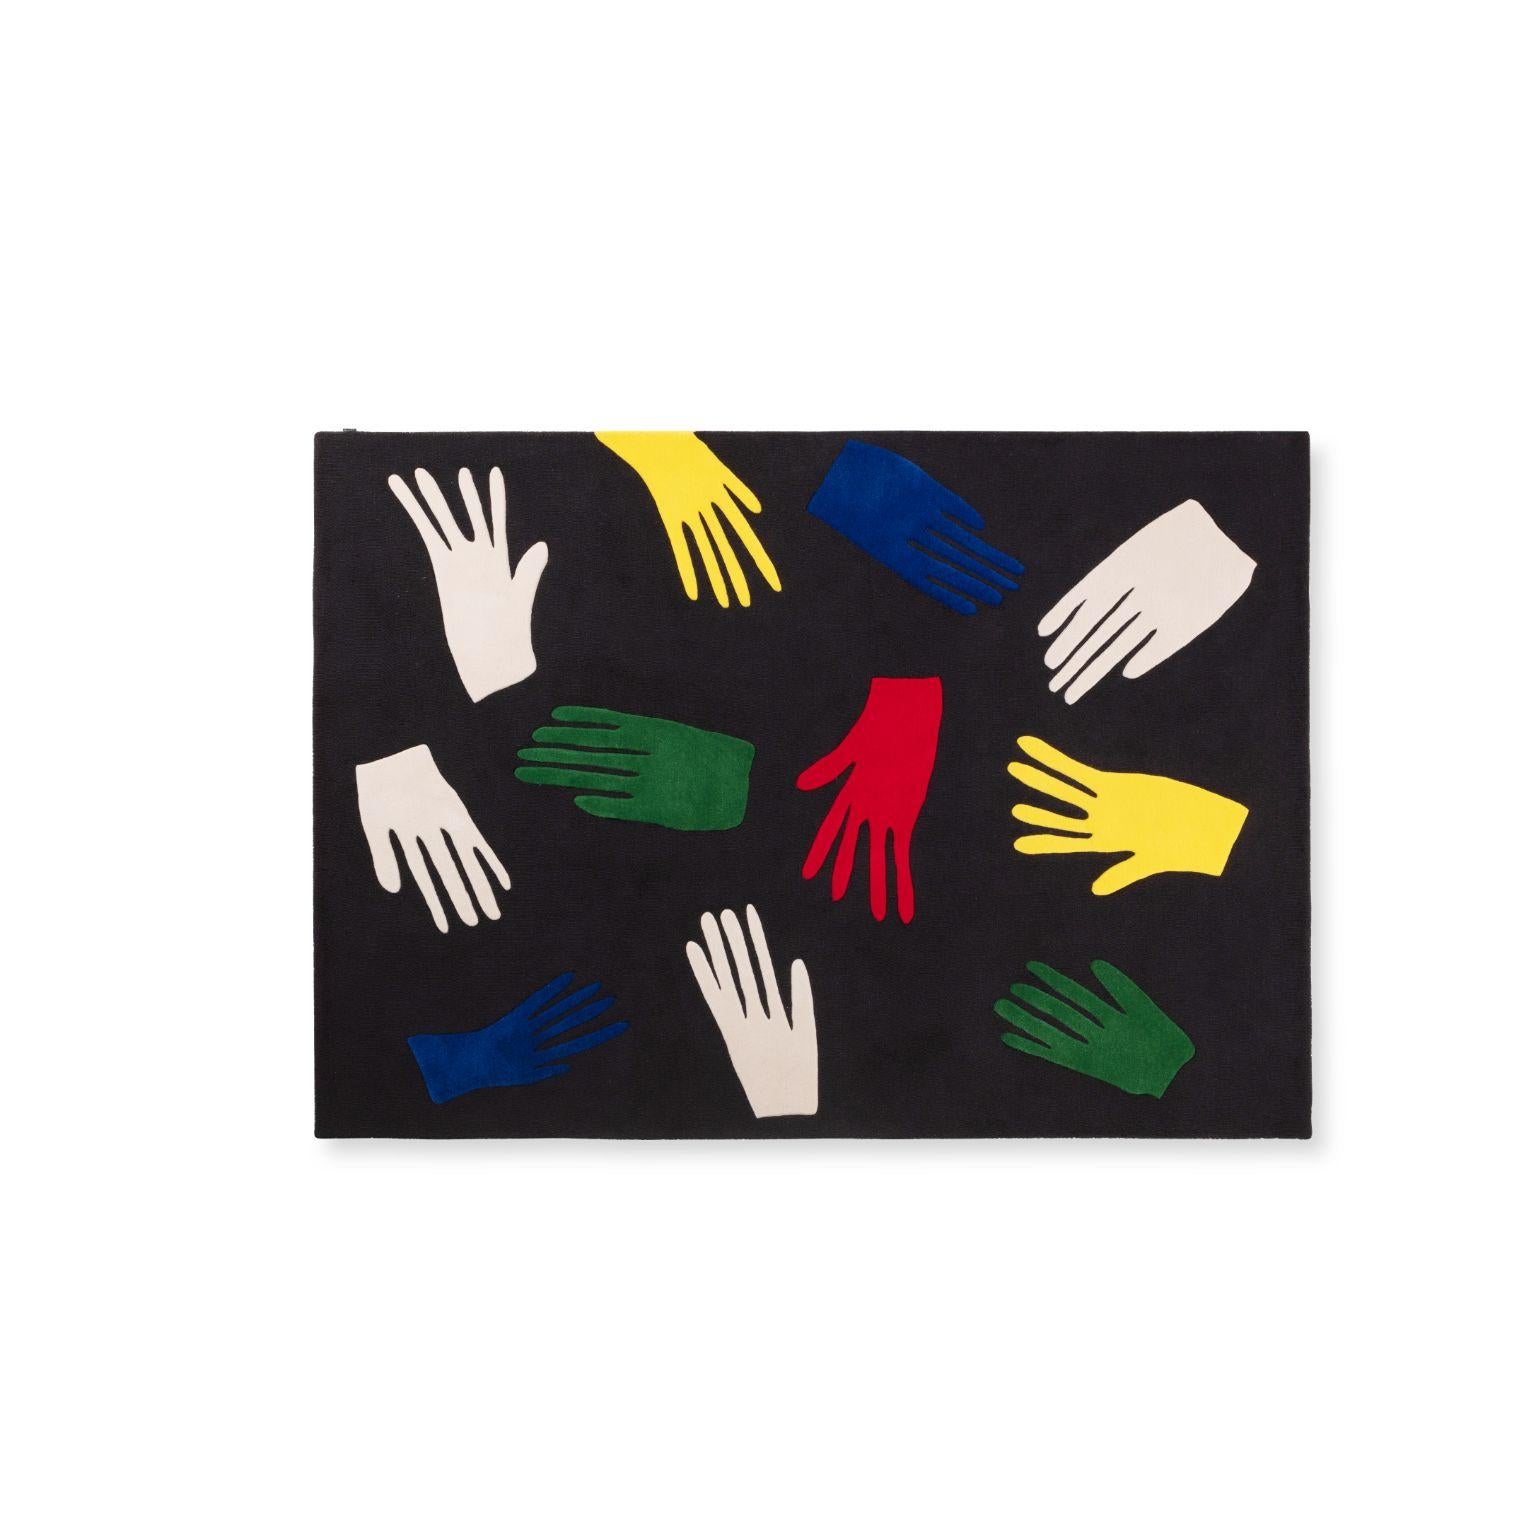 Mano chrome rug by Jean-Charles de Castelbajac
Dimensions: W 170 x H 240 cm
Materials: wool
Dimension customization is possible for bigger format only. 

Jean-Charles de Castelbajac is a visionary designer and artist who anticipated the